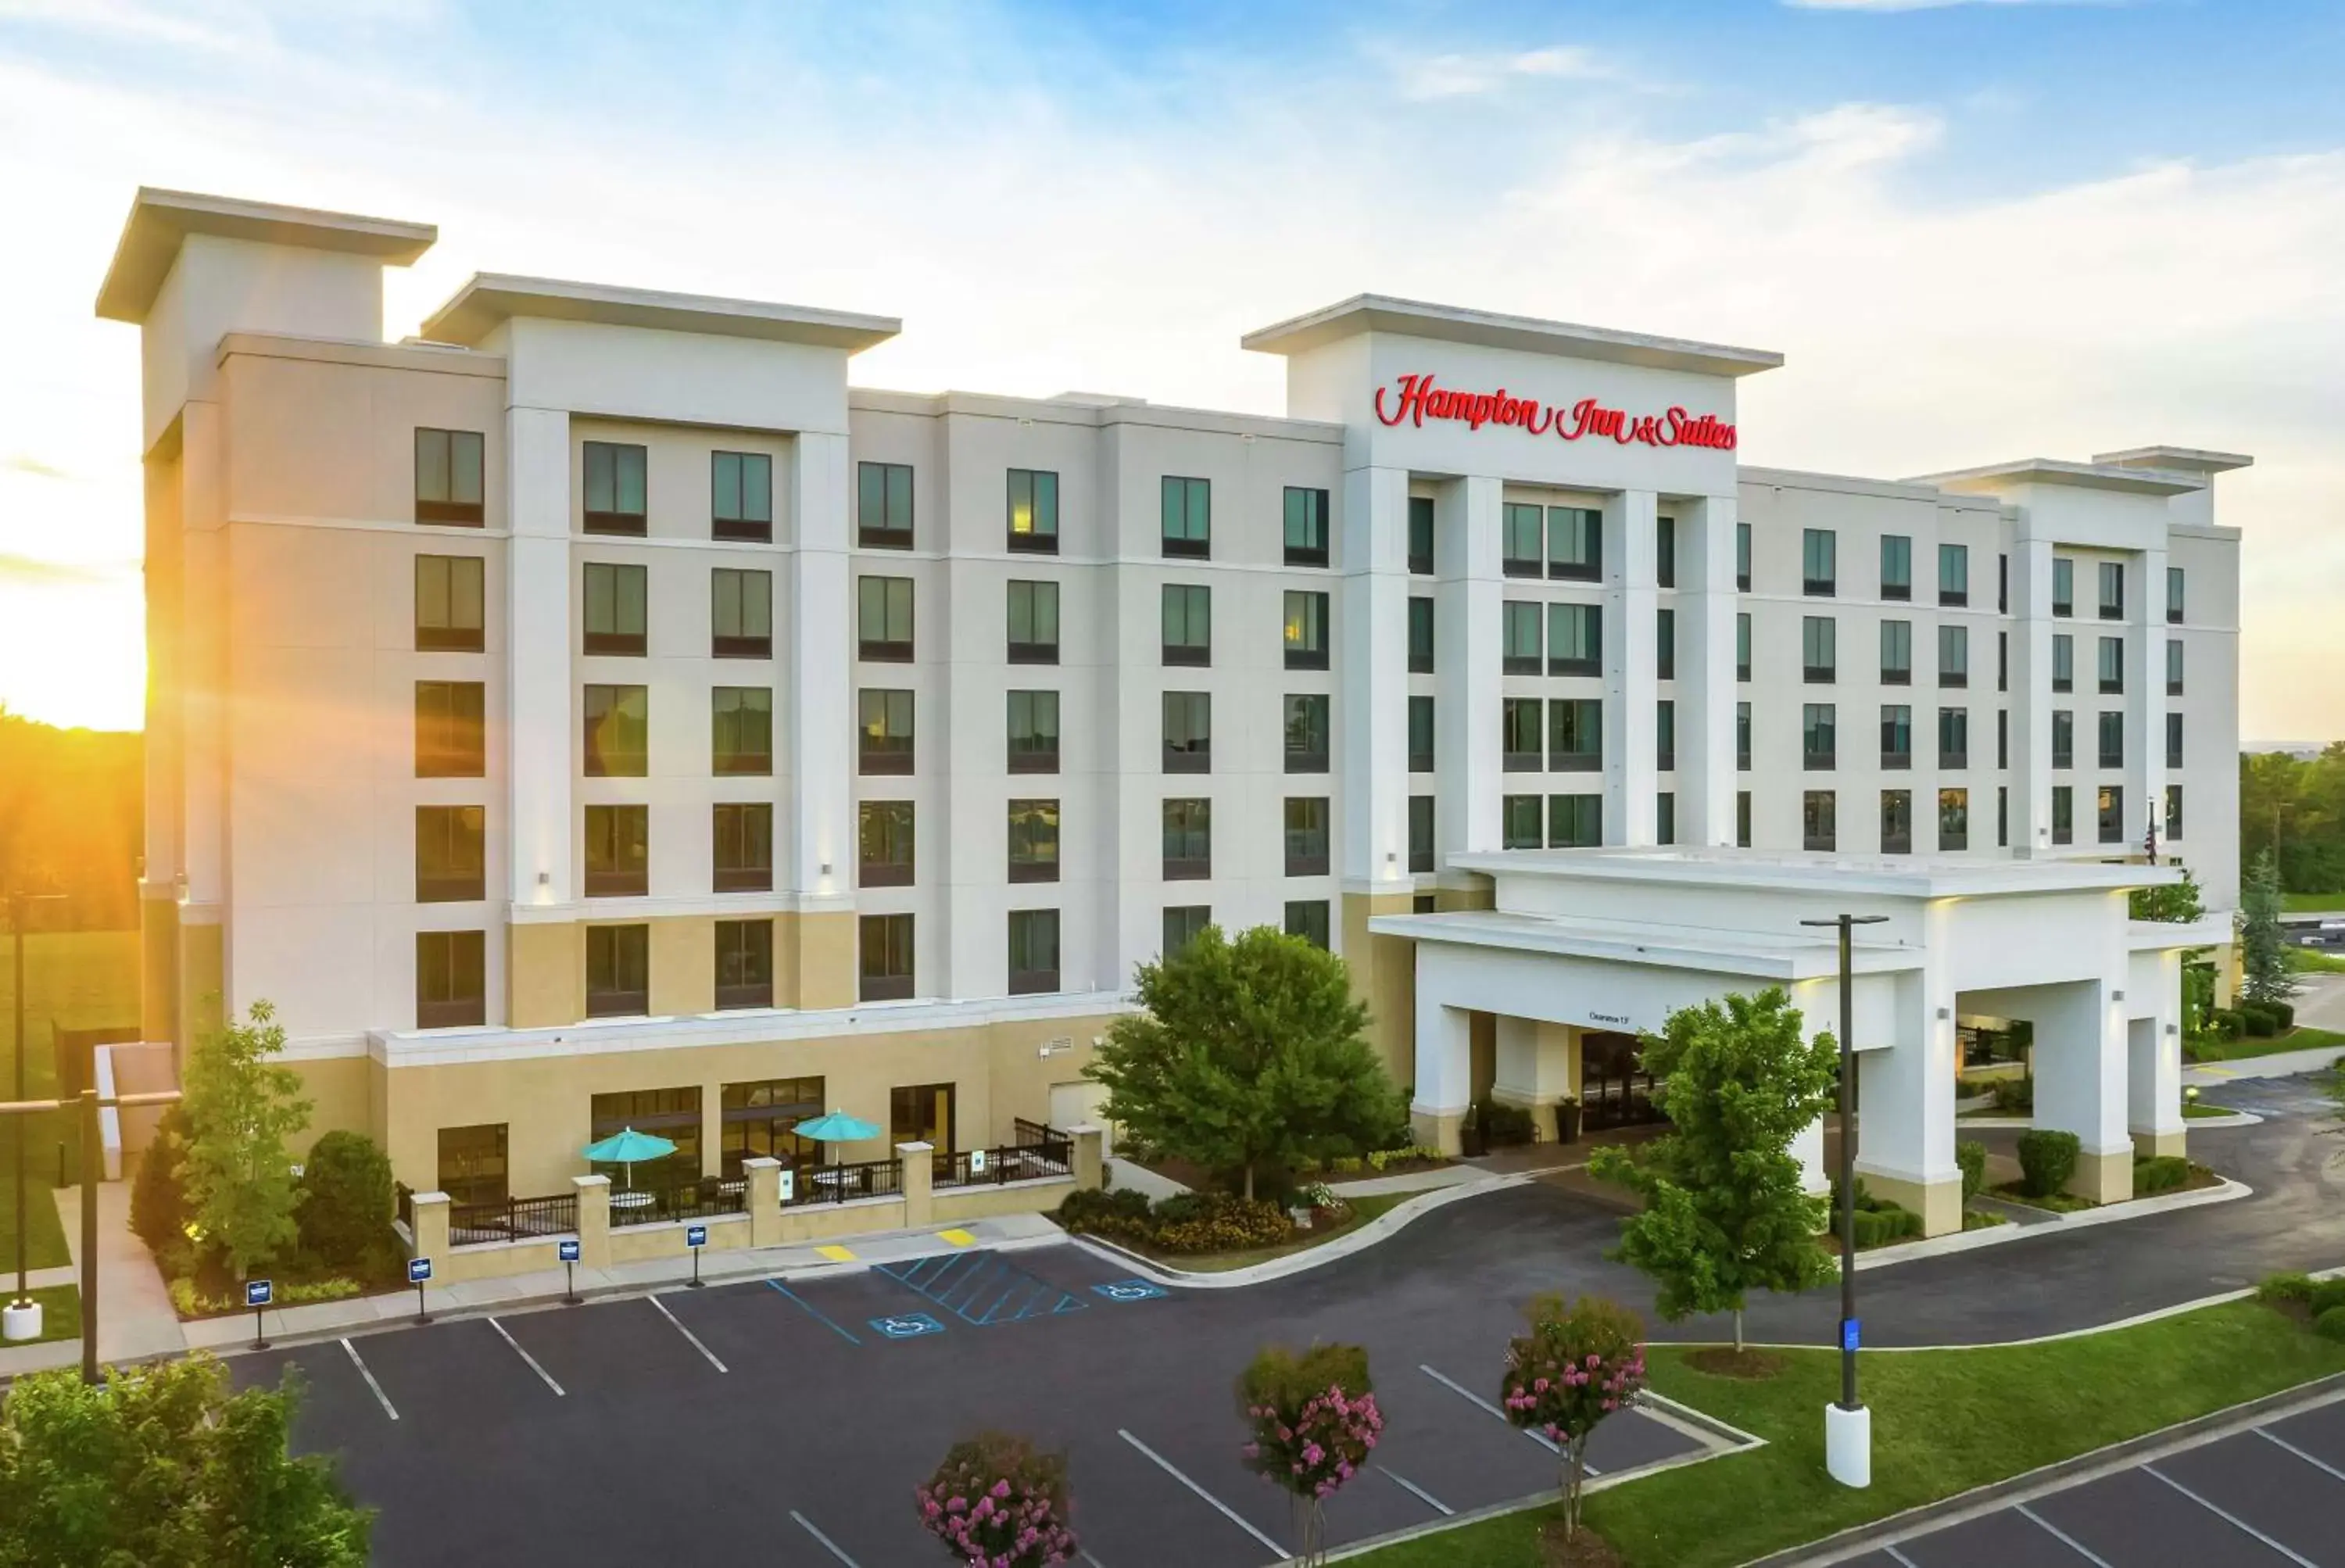 Property Building in Hampton Inn & Suites Chattanooga/Hamilton Place